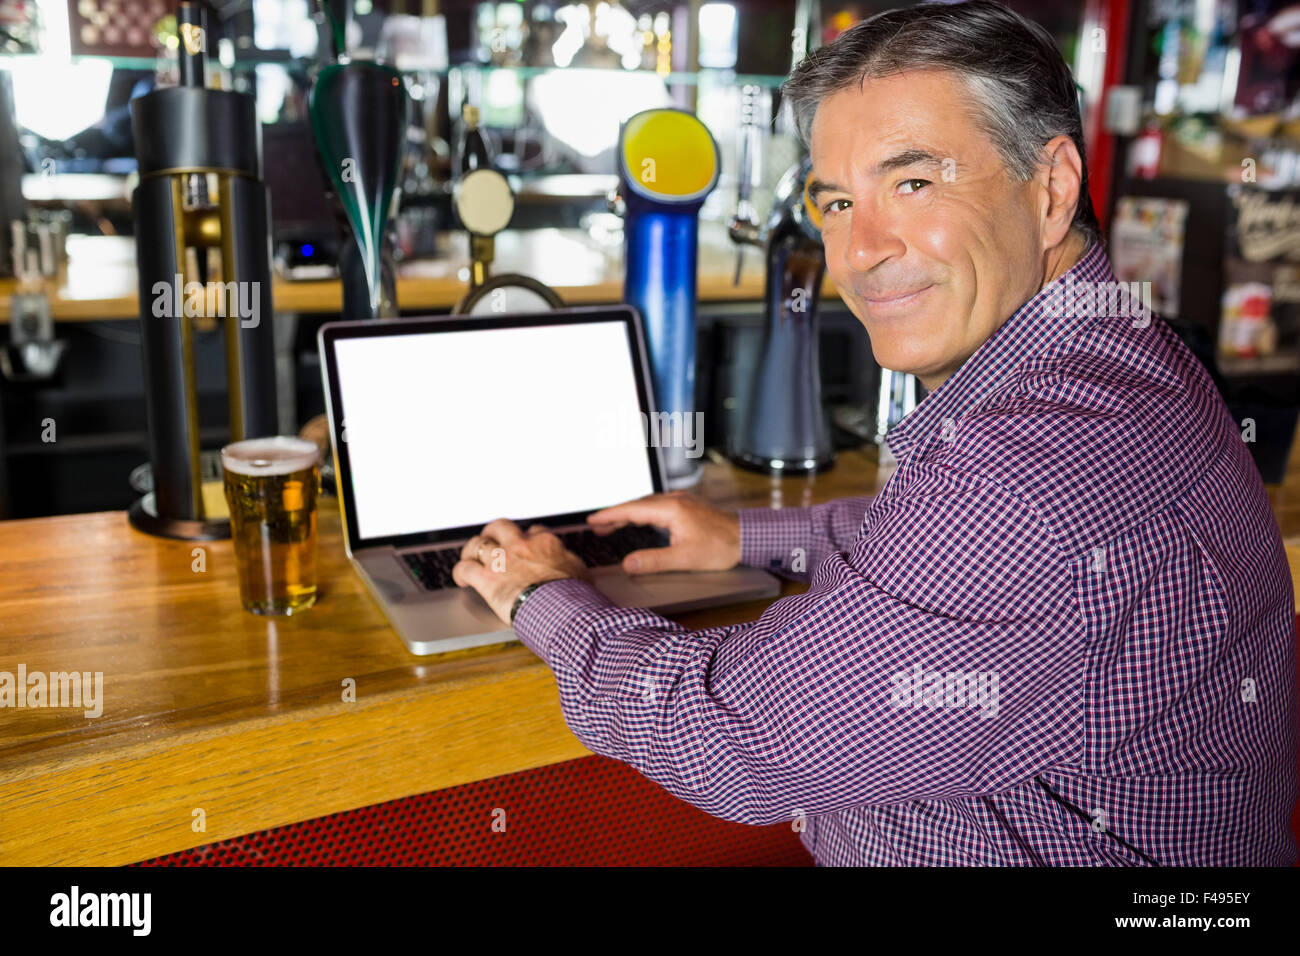 Man with grey hair using his laptop Stock Photo